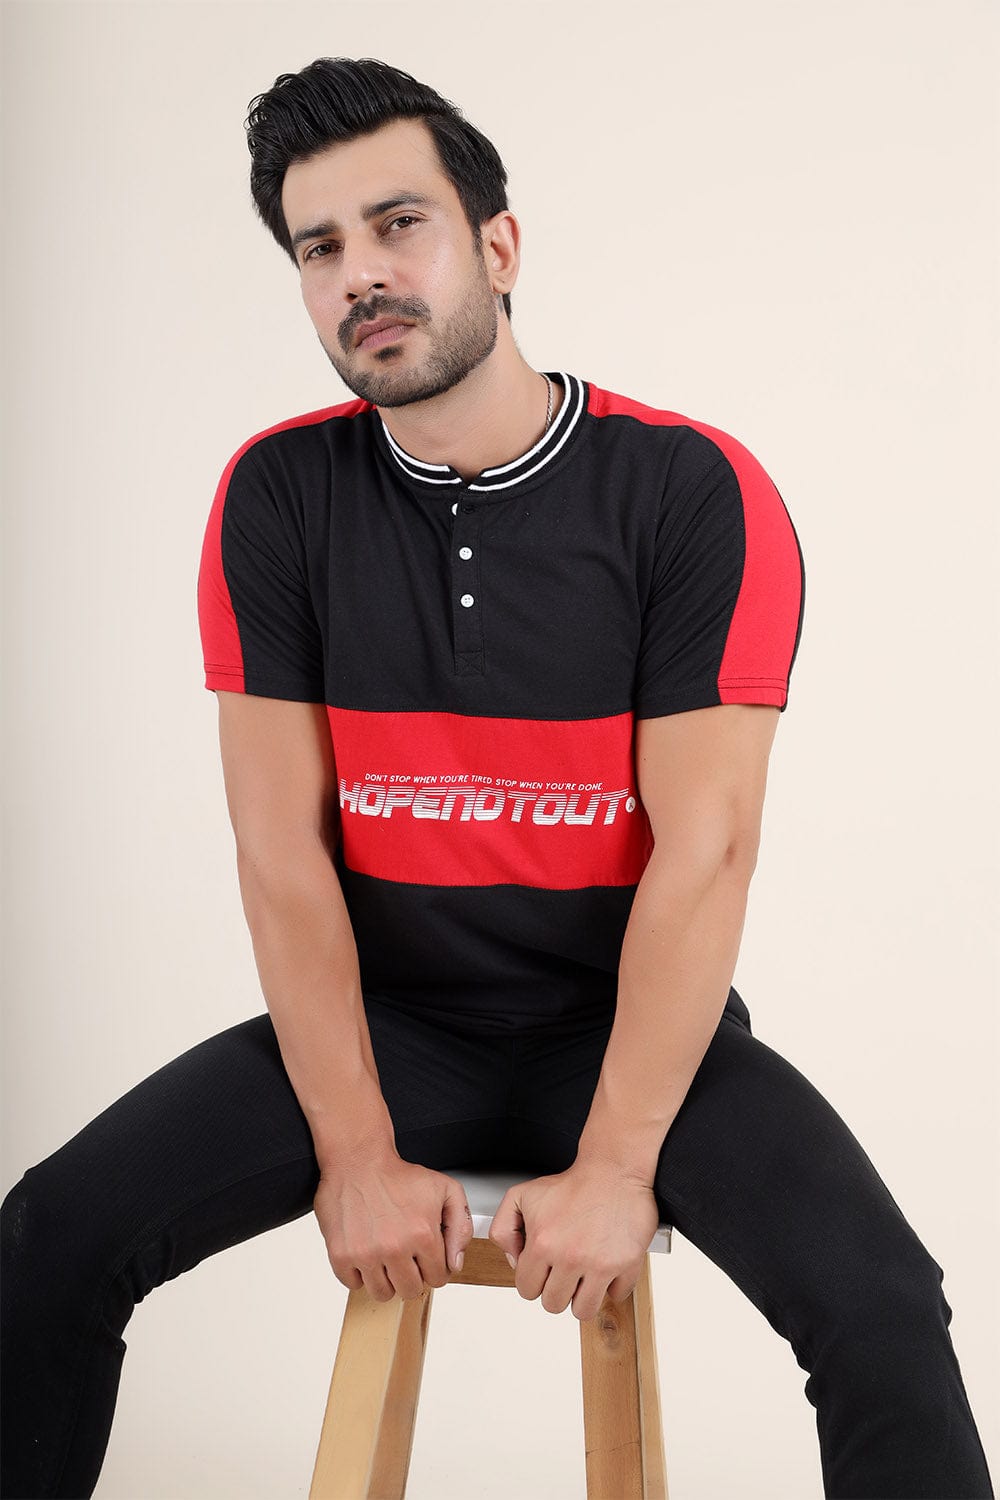 Hope Not Out by Shahid Afridi Men Polo Shirt Red and Black Printed Shirt